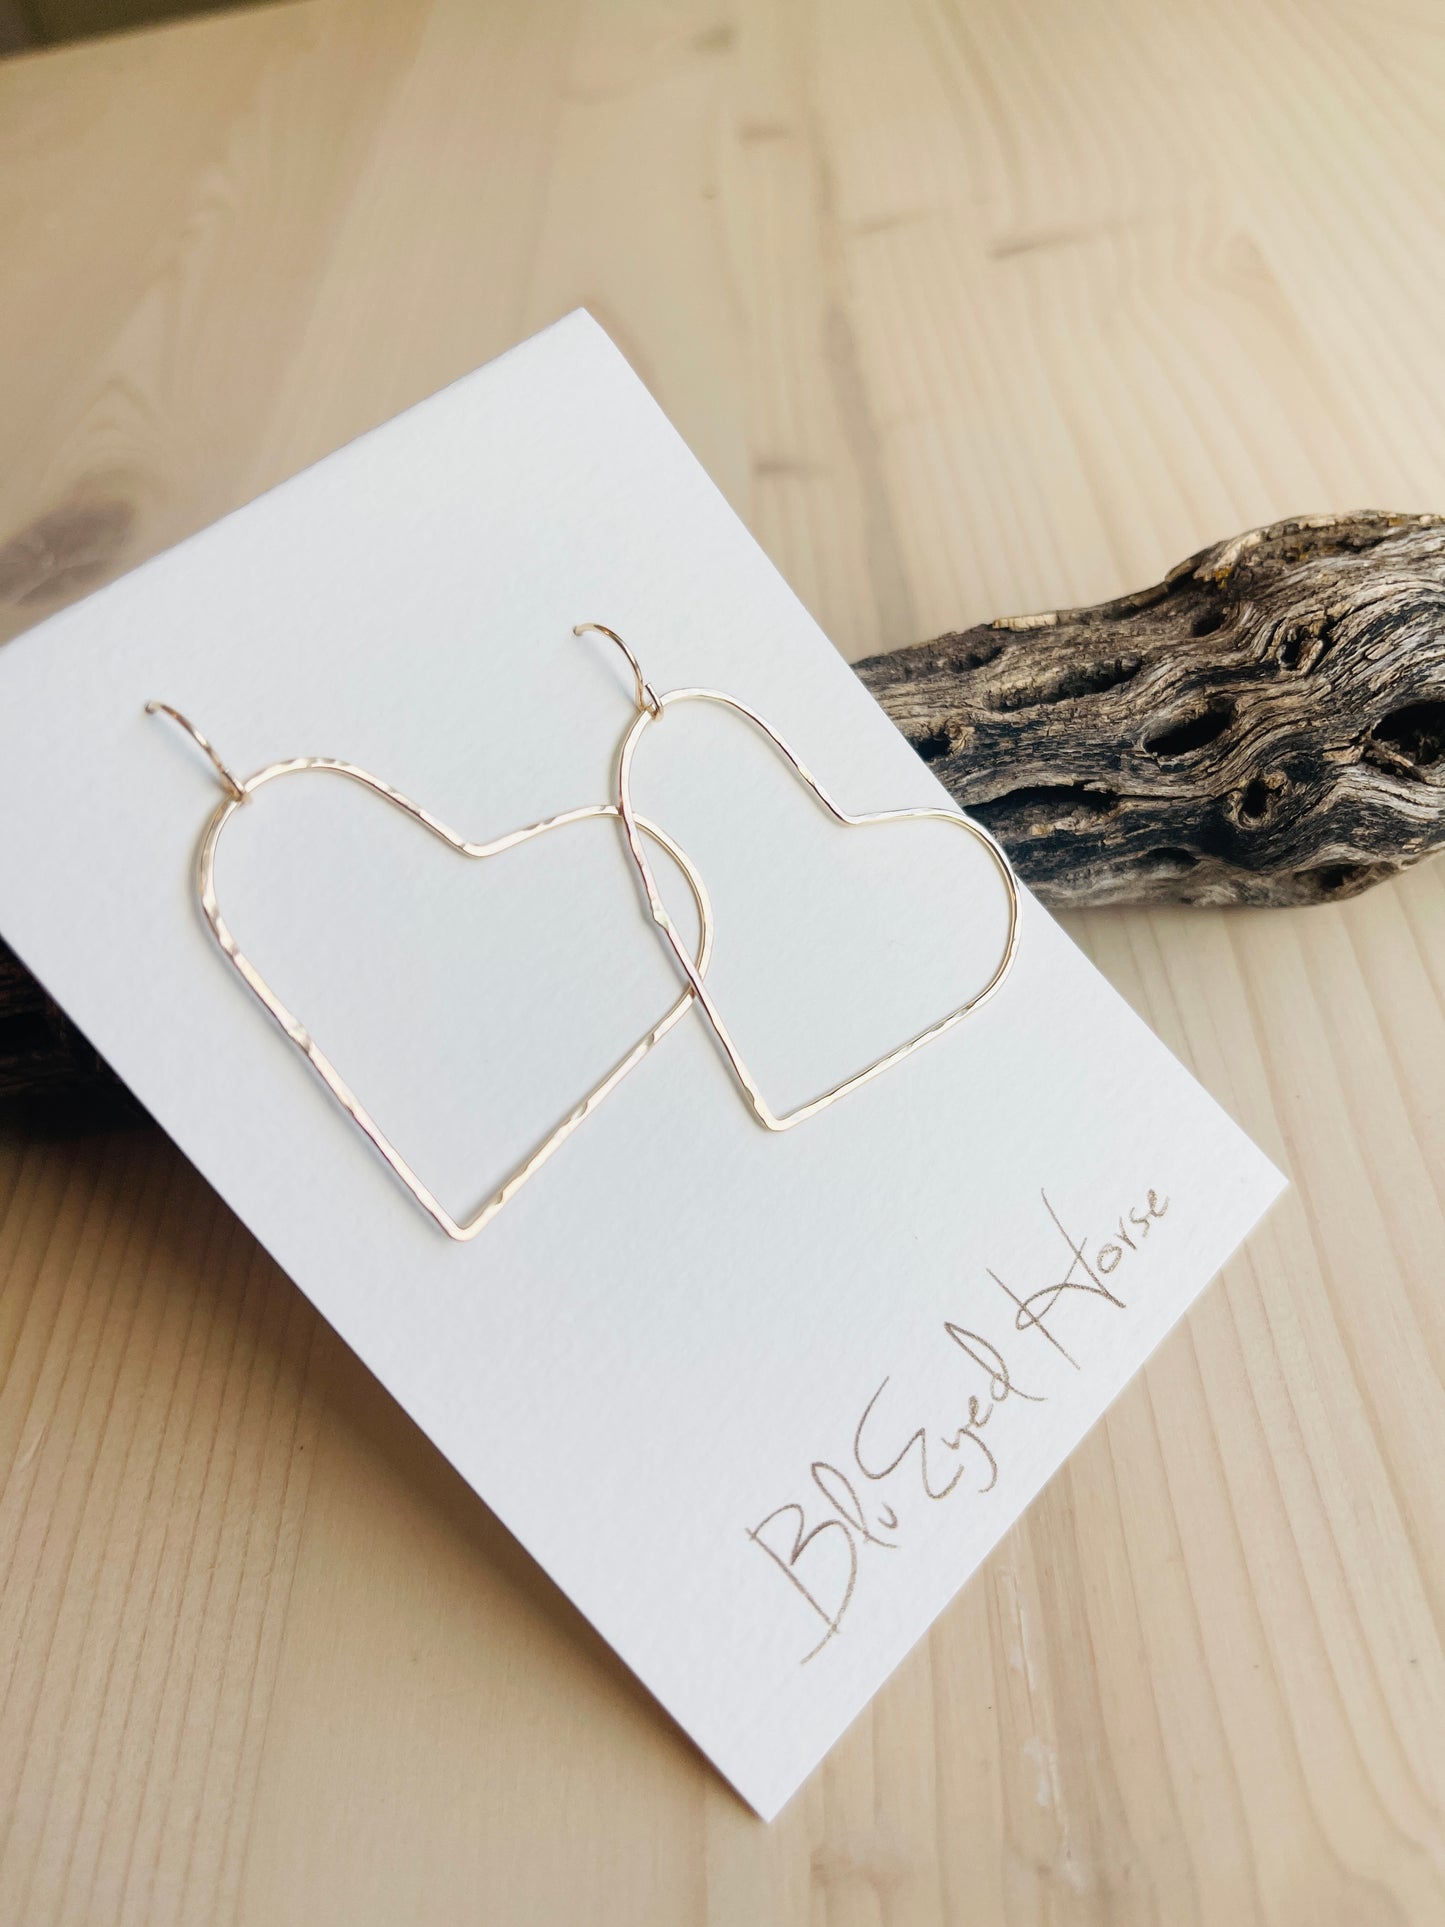 Gold Heart Earrings displayed on driftwood